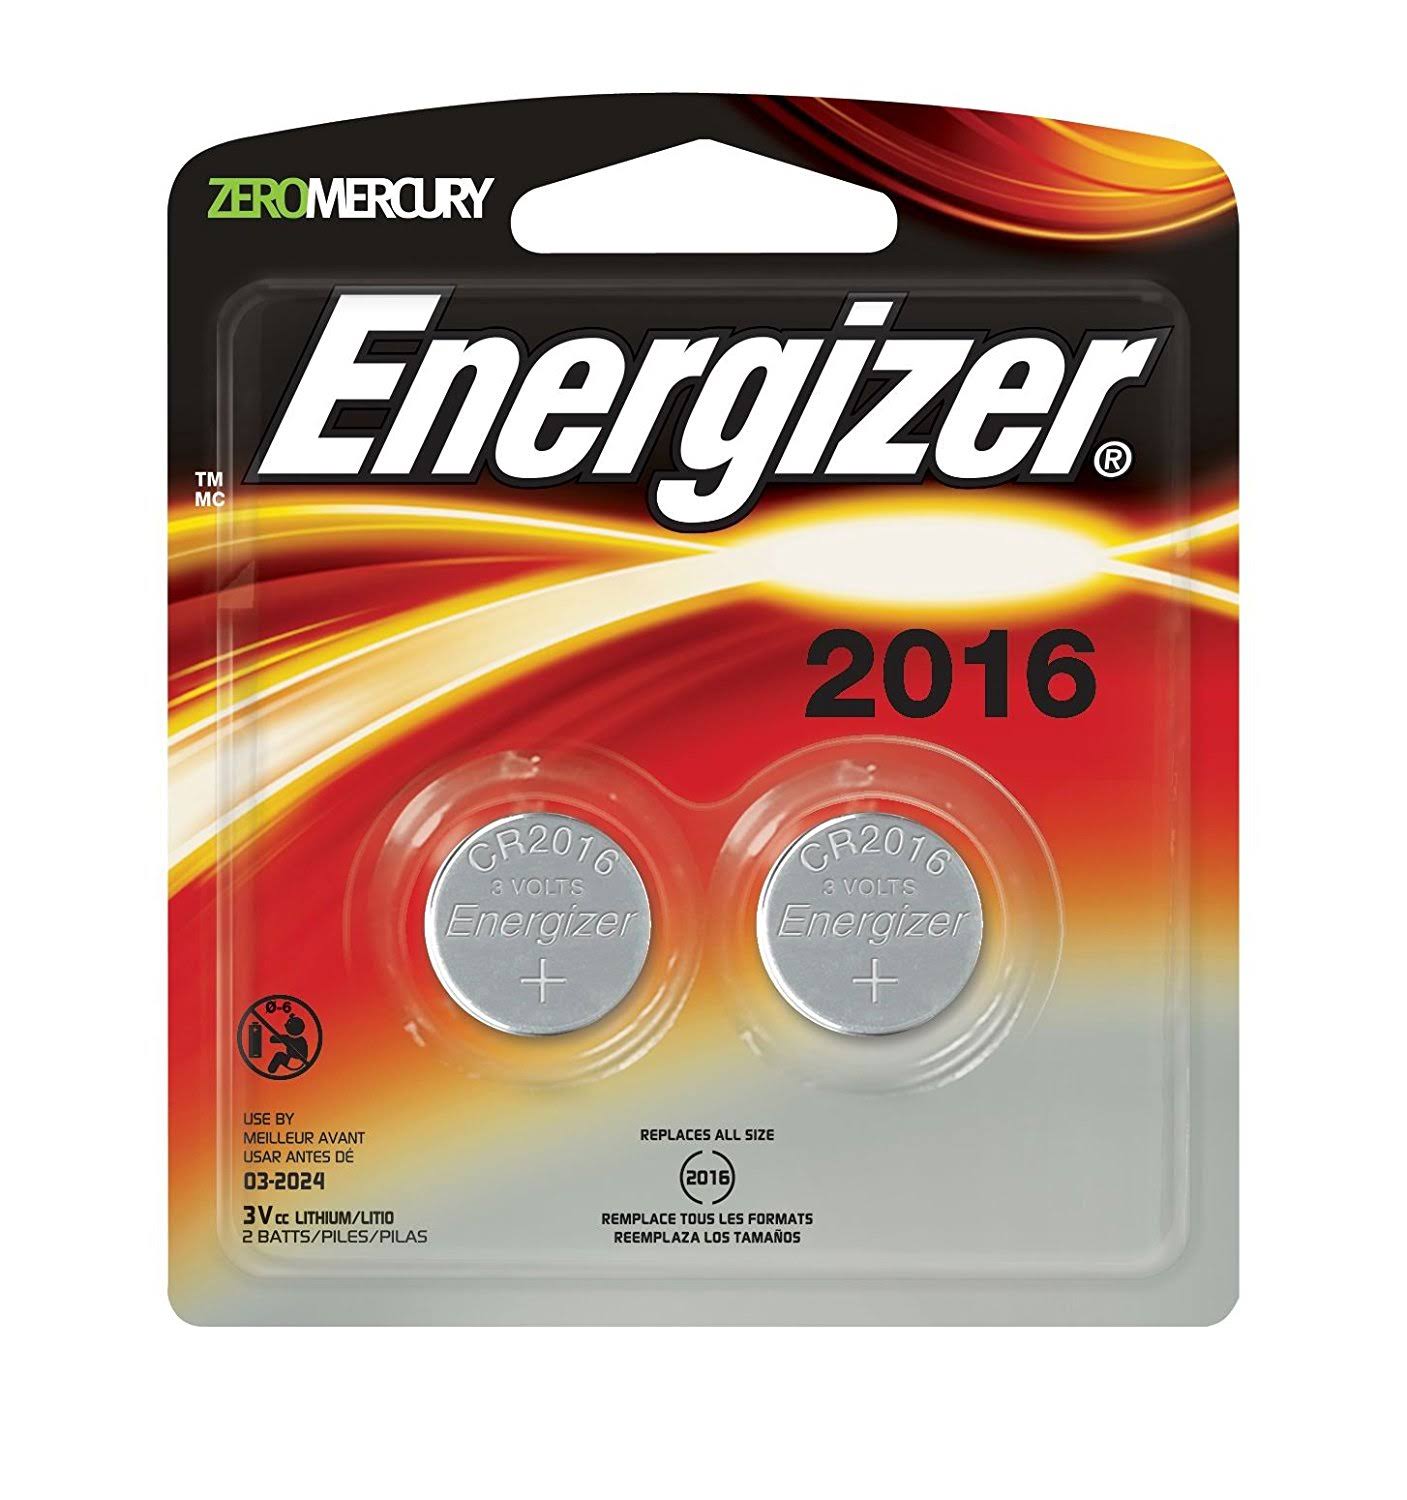 Energizer 2016 Button Cell Battery - 2pk, 3V, Lithium